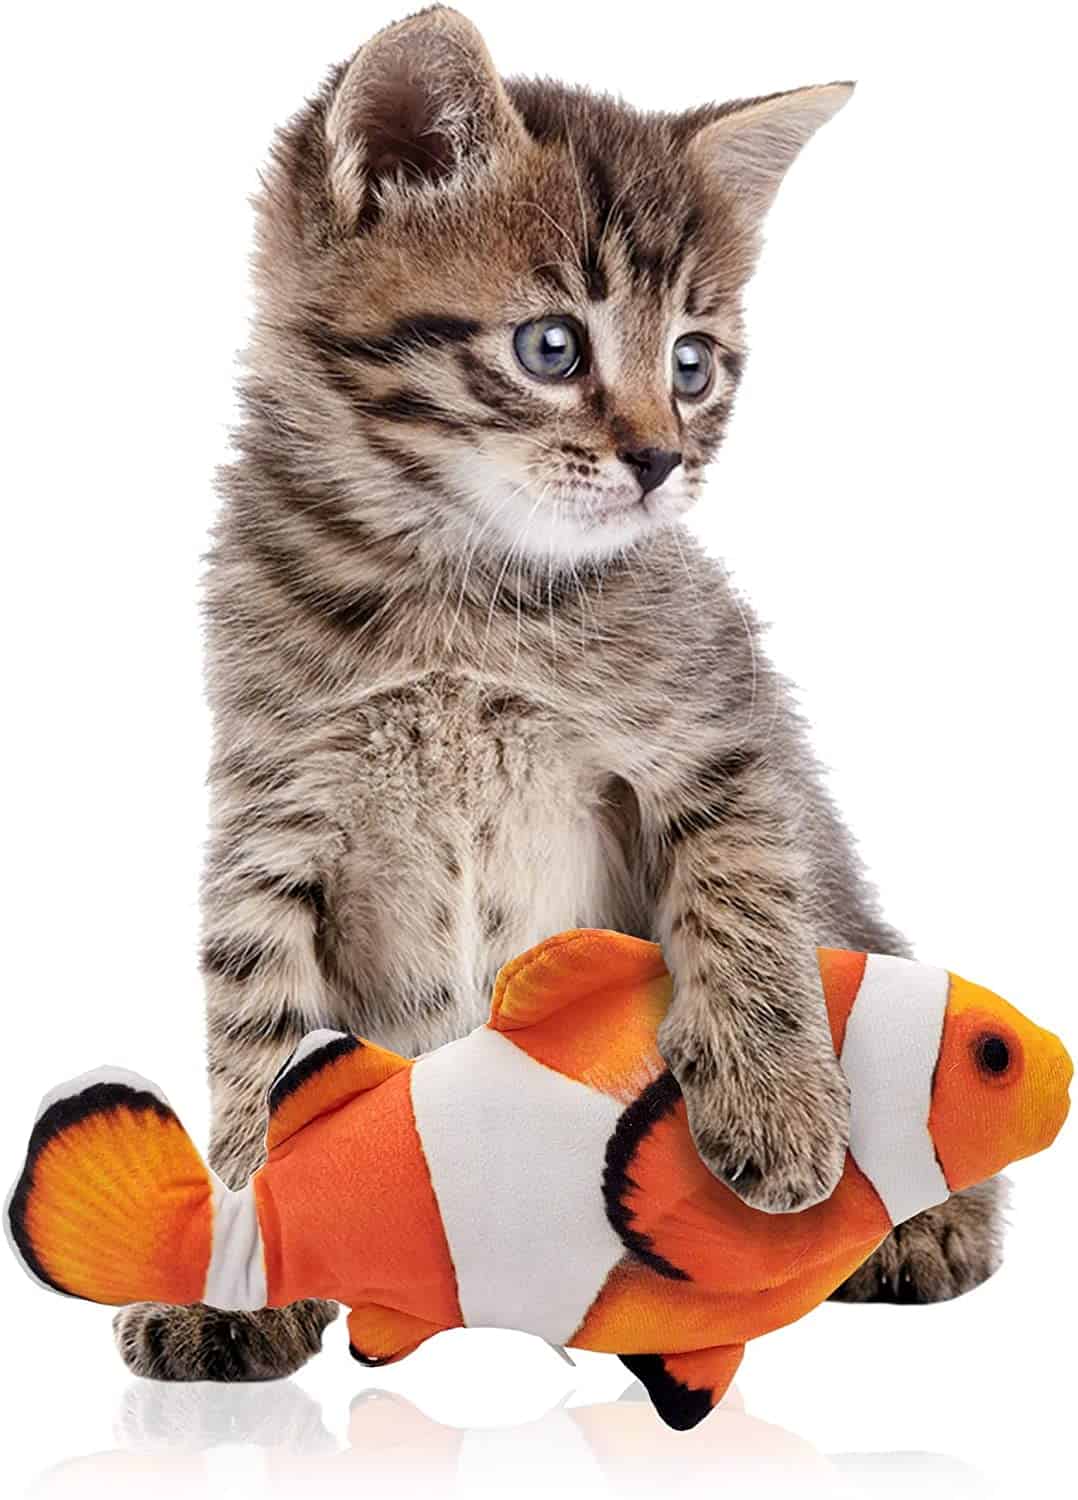 a cat playing with a clown fish toy